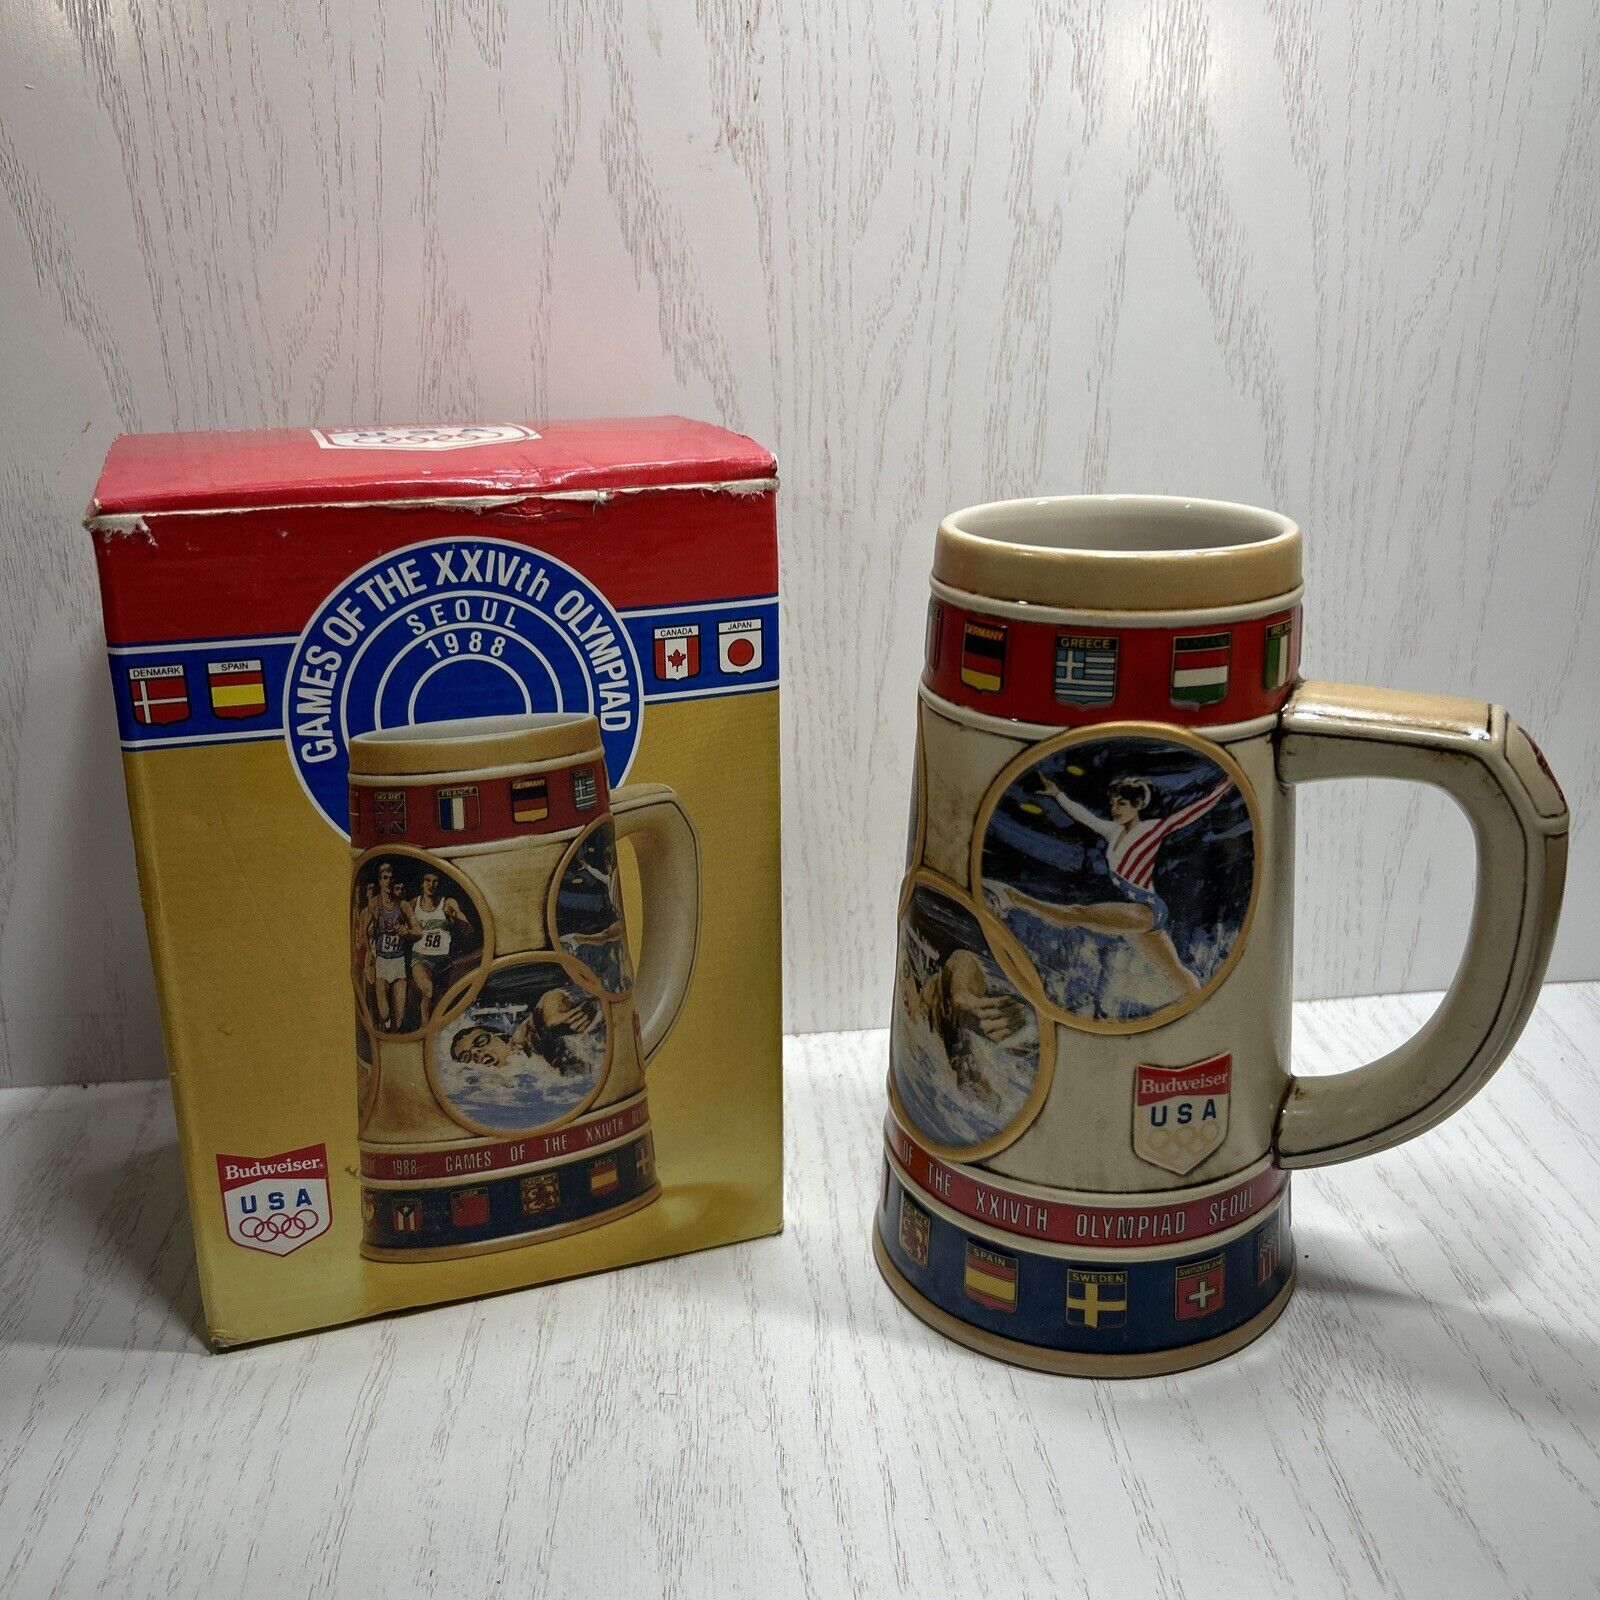 Anheuser-Busch Budweiser beer stein -1988 Seoul Olympics, commemorative Vintage